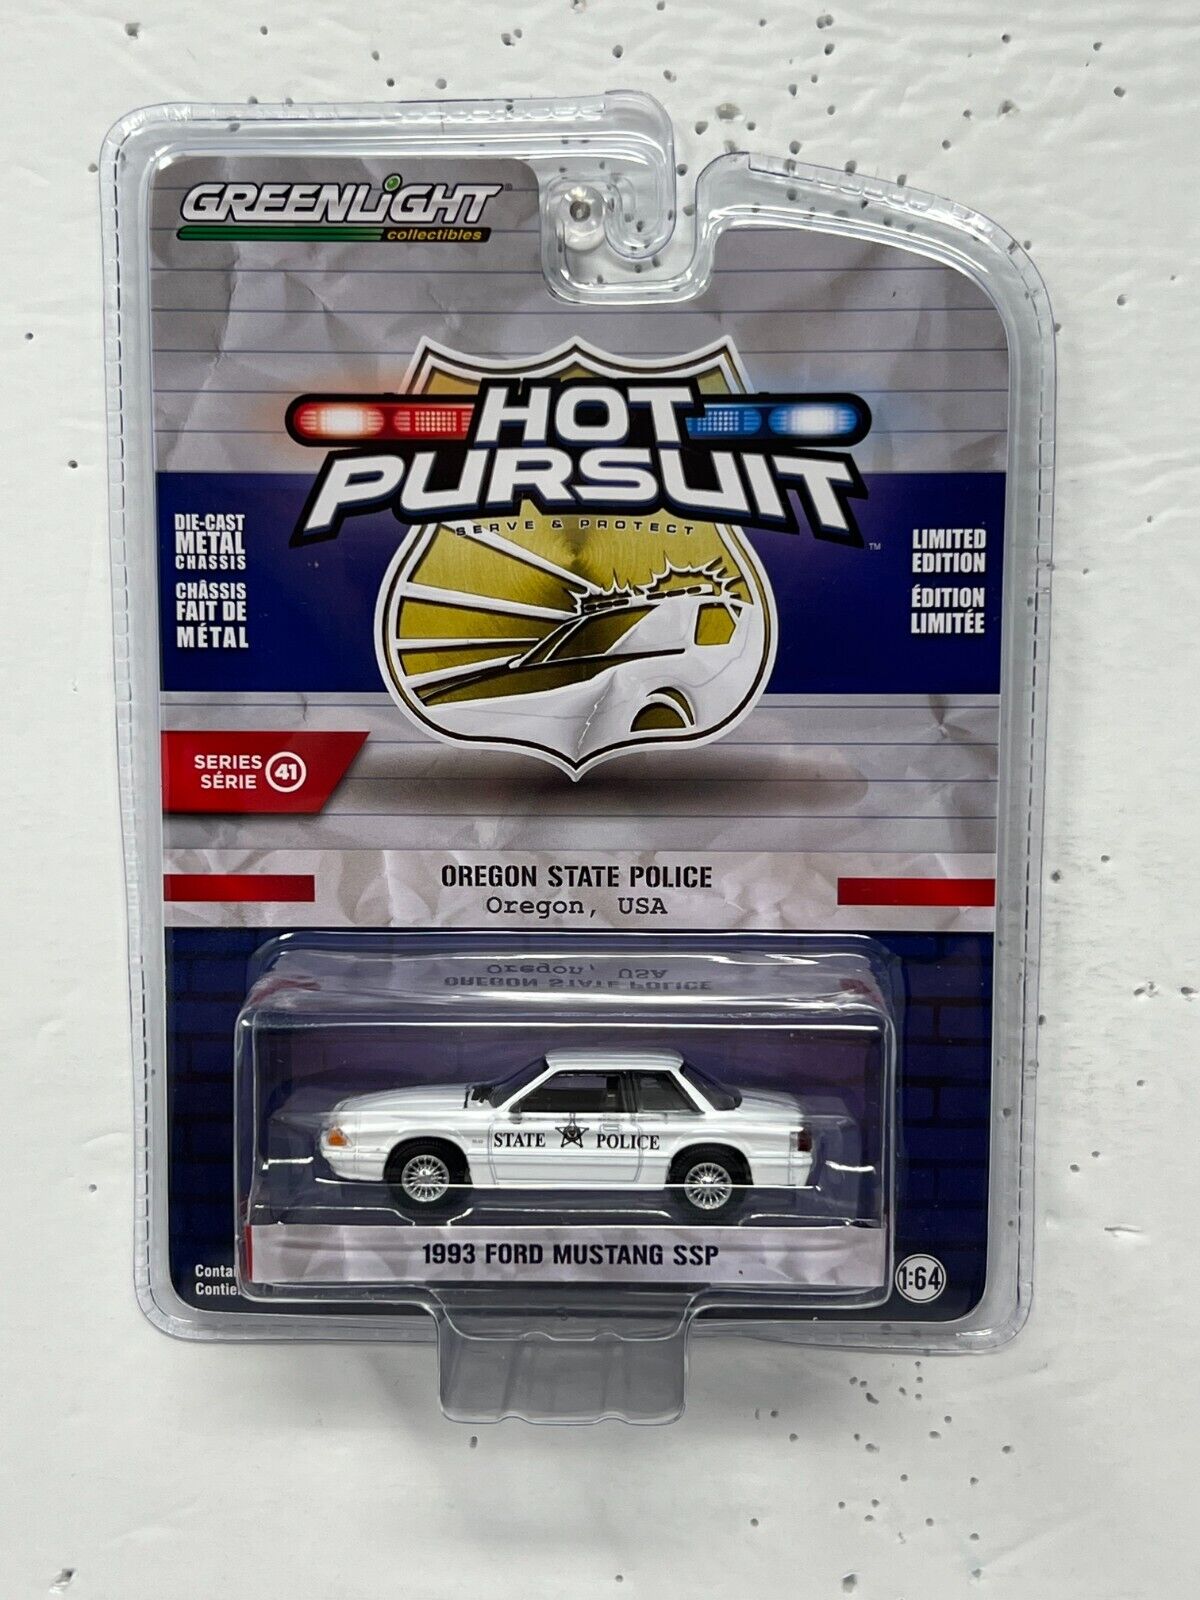 Greenlight Hot Pursuit 1993 Ford Mustang SSP 1:64 Diecast